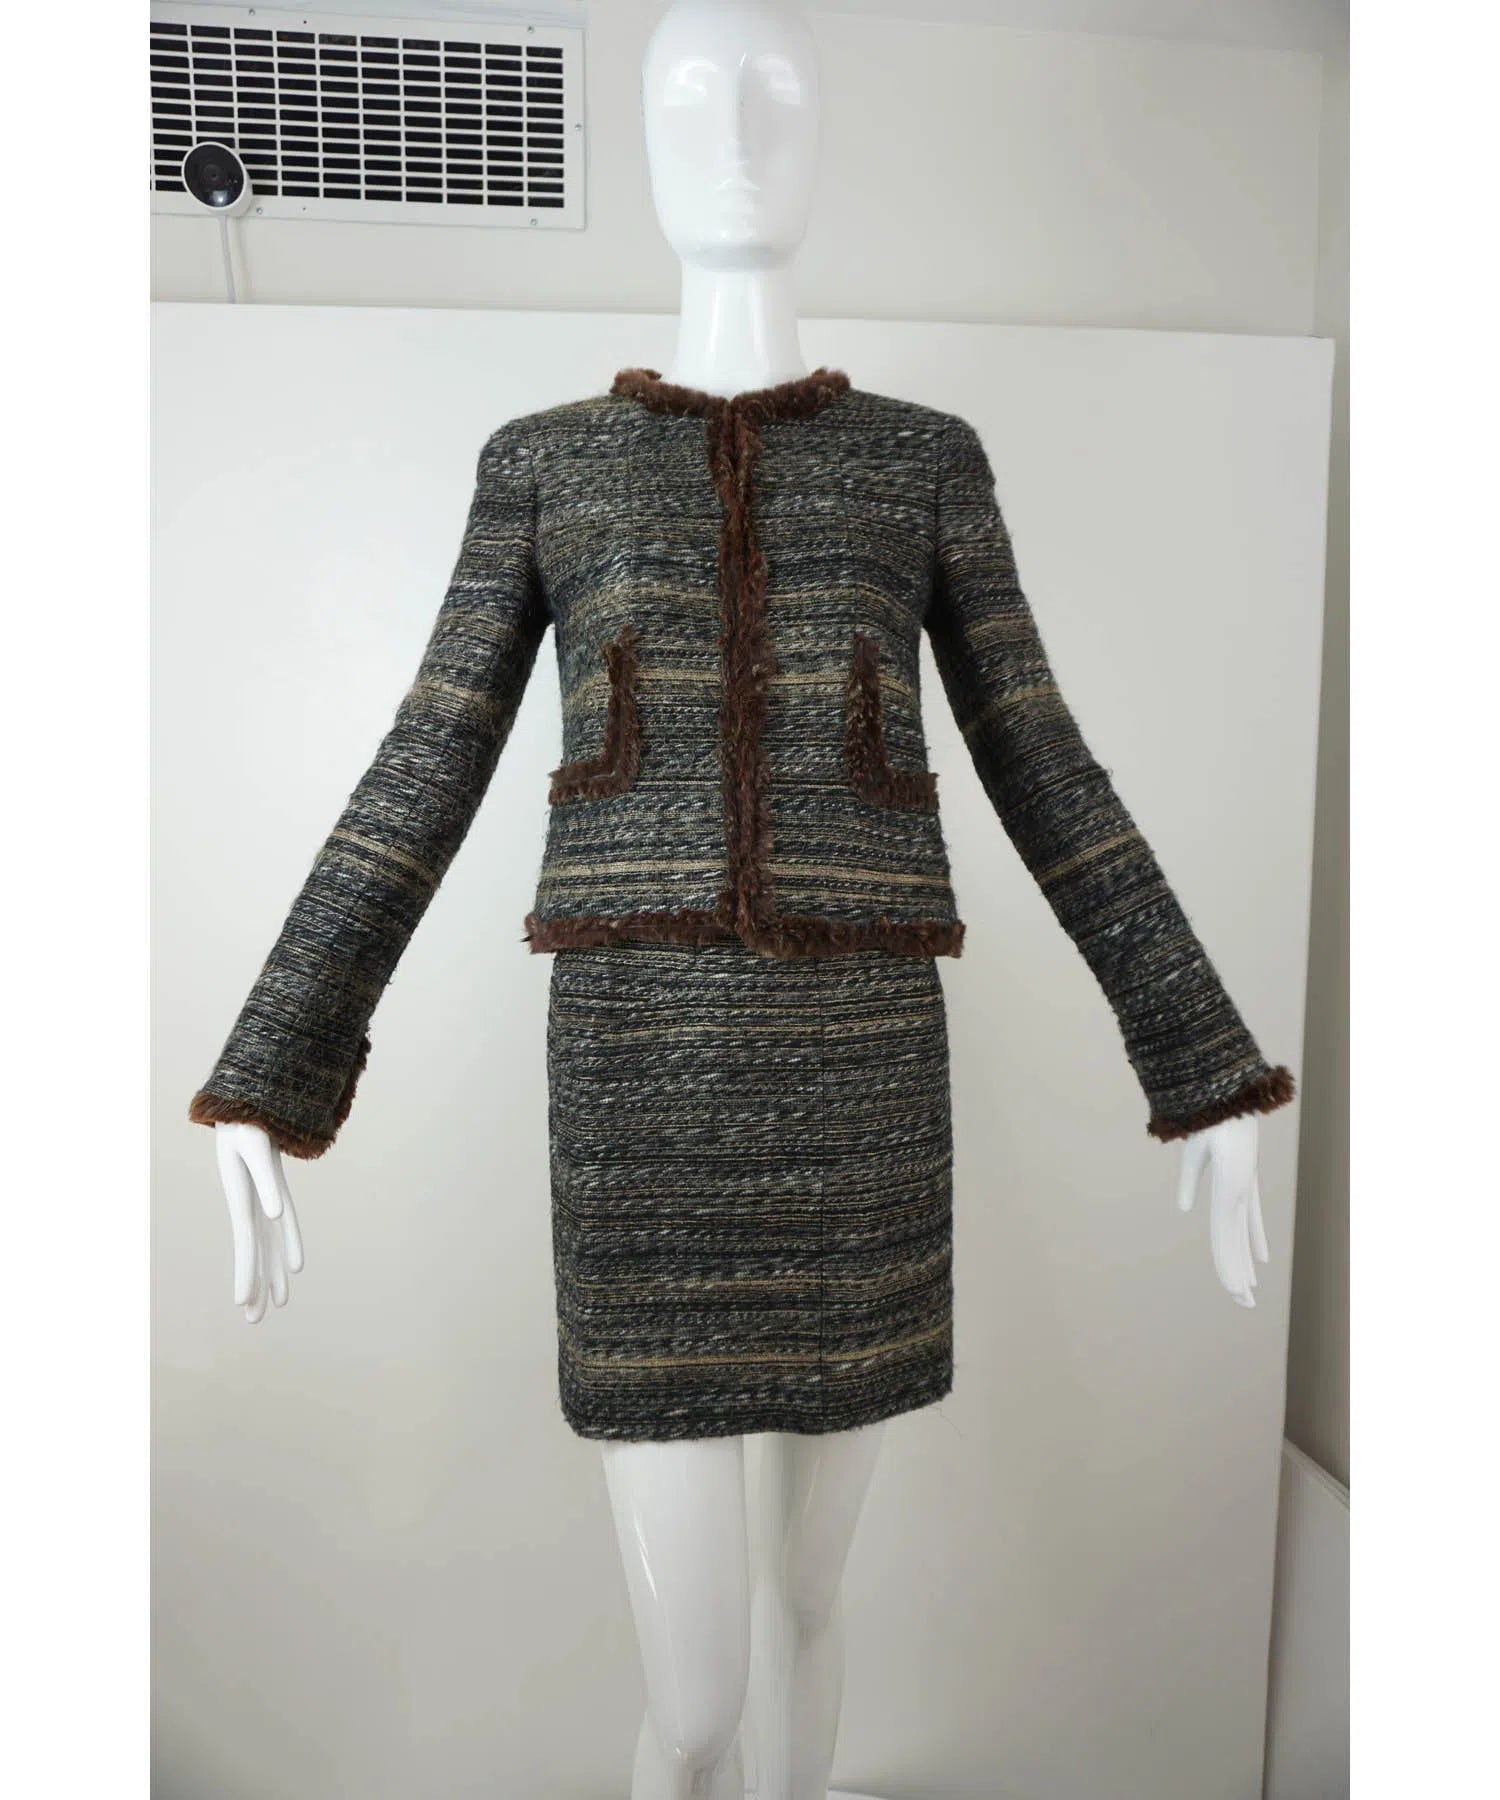 Chanel 2005 Fantasy Tweed Suit Jacket and Skirt - Foxy Couture Carmel